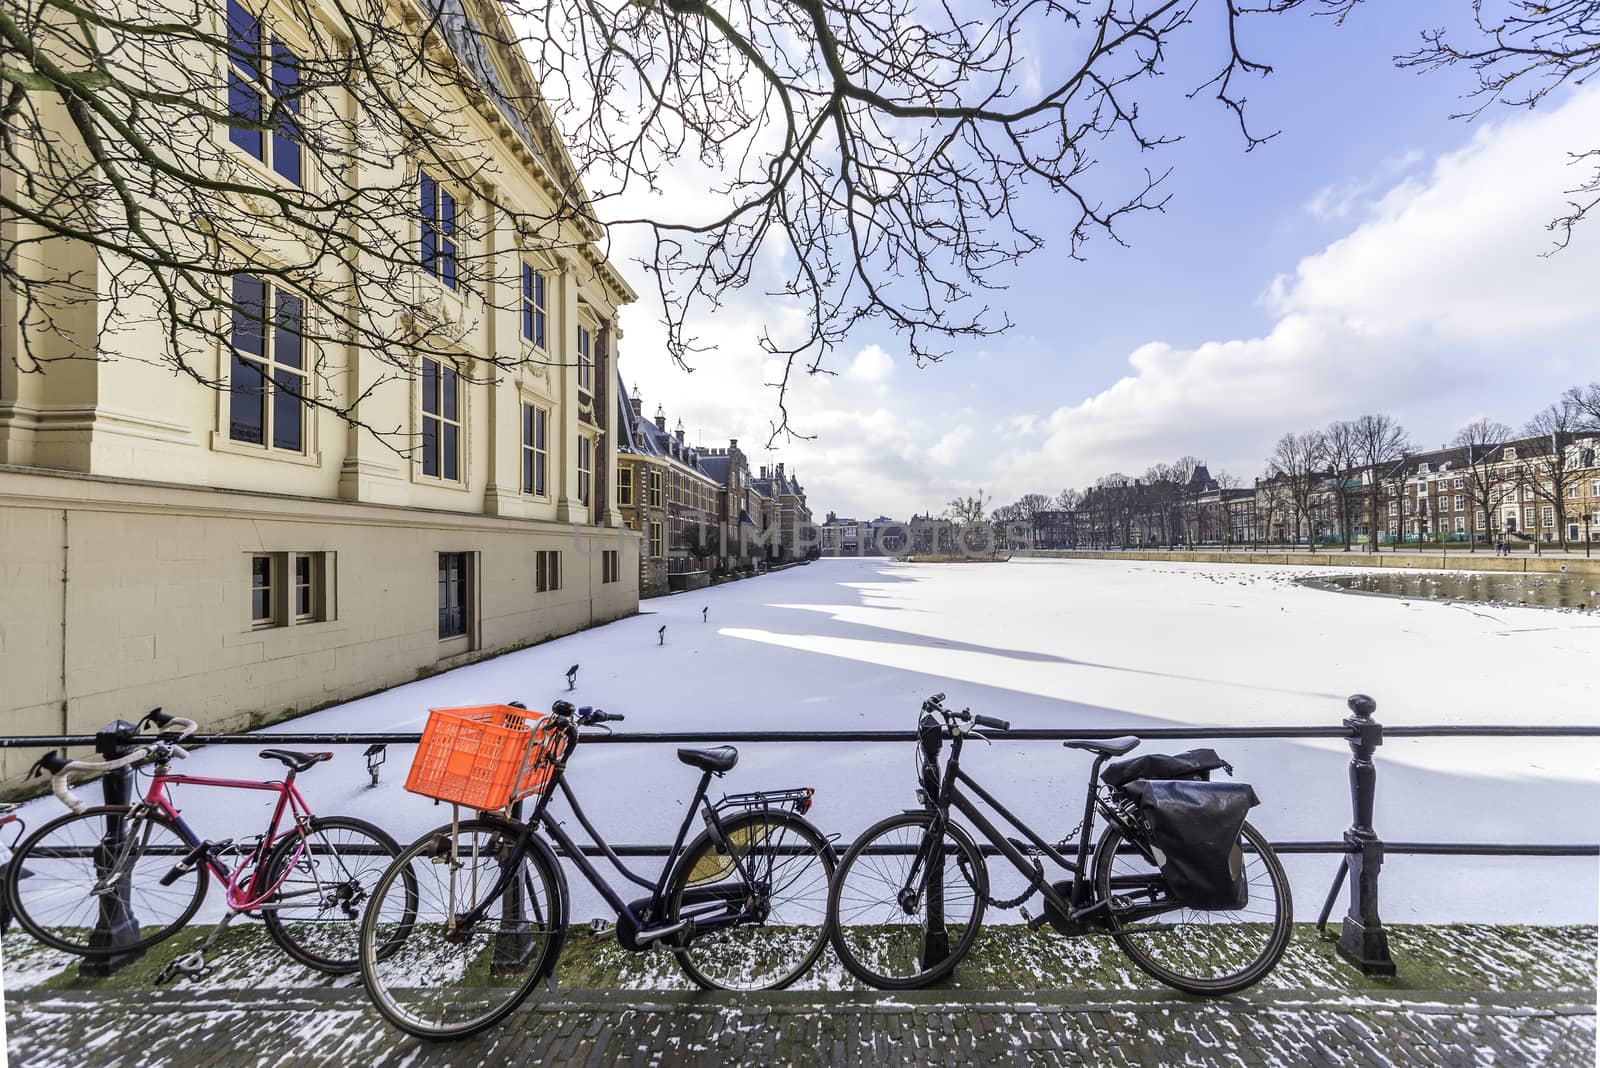 Rusty bicycles in front of the panoramic view of the Dutch parliament building and its frozen pond water by ankorlight